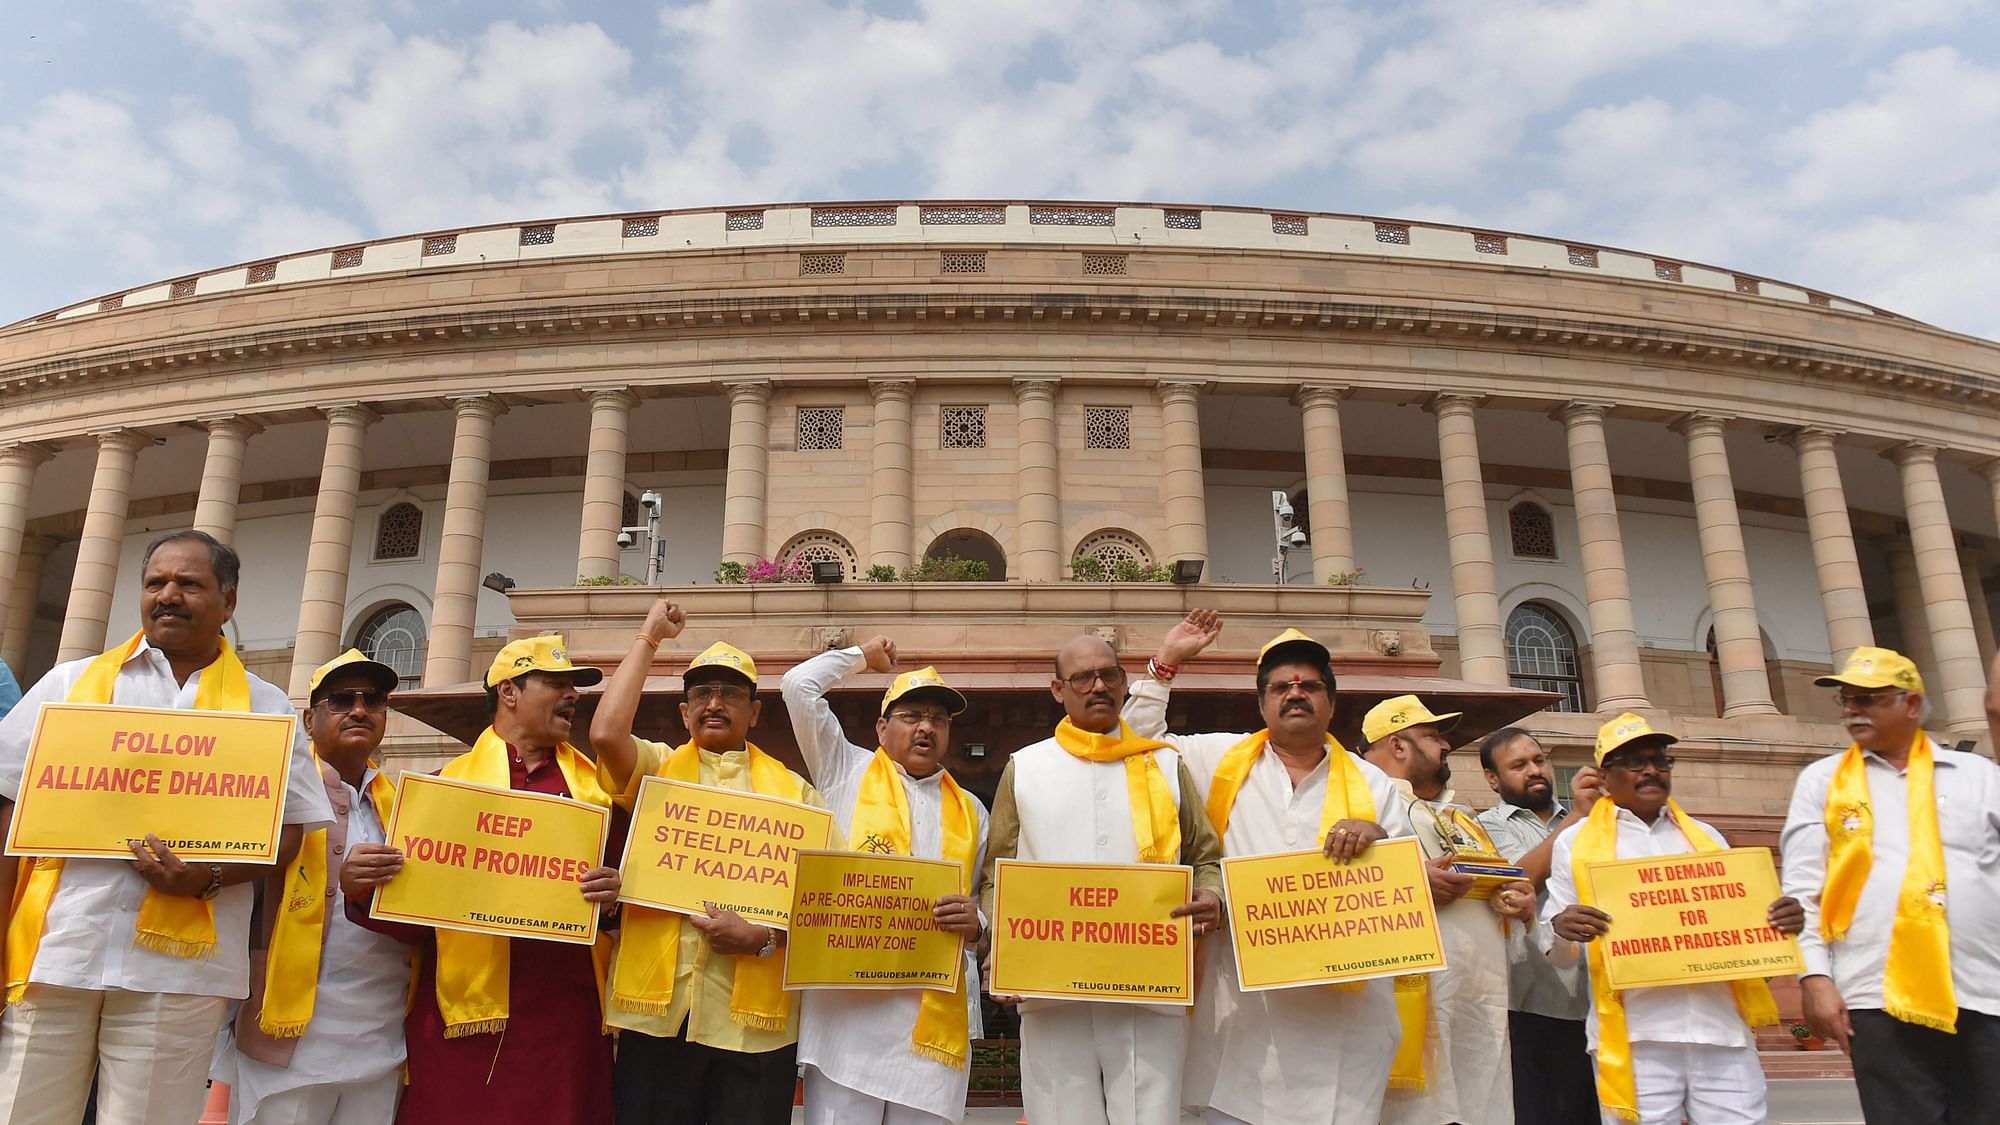 TDP party leaders hold placards and raise slogans demanding special status for Andhra Pradesh during the budget session.